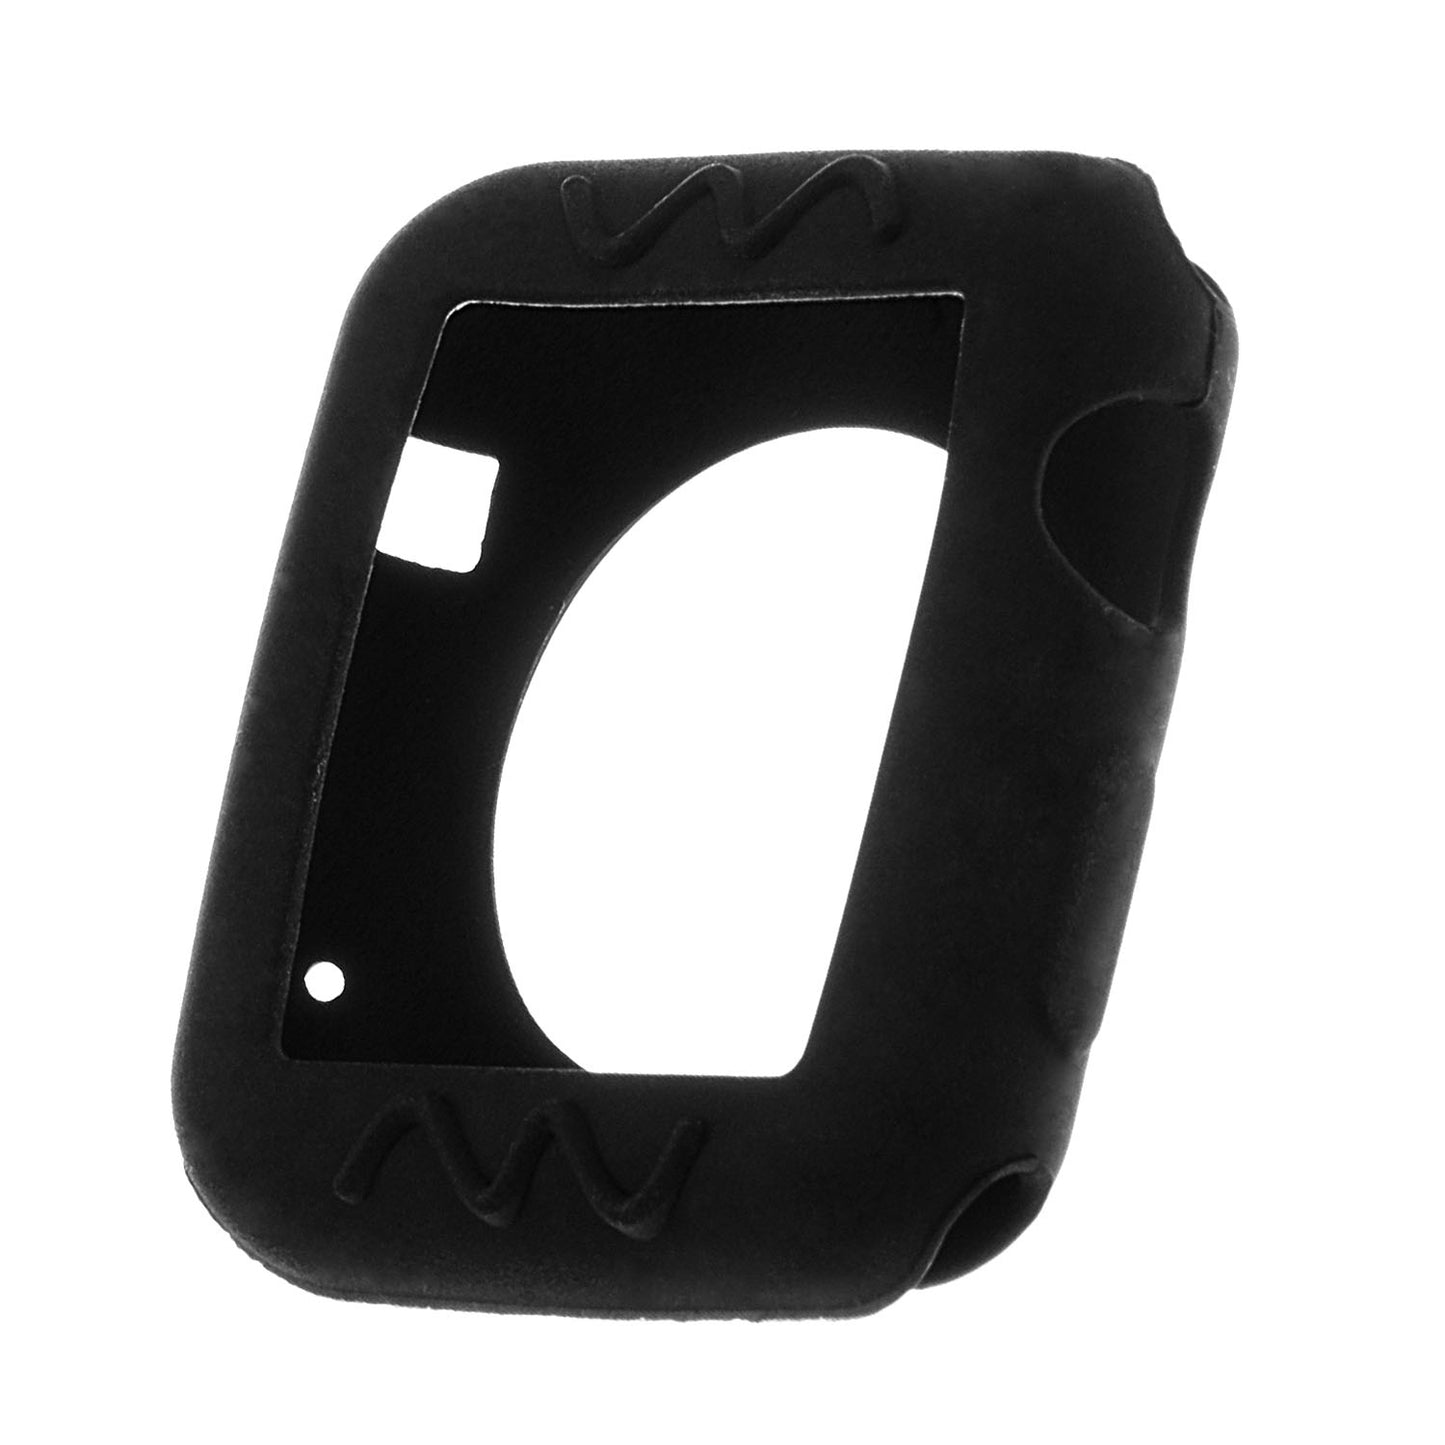 Rubber Protective Case for Apple Watch Series 1/2/3